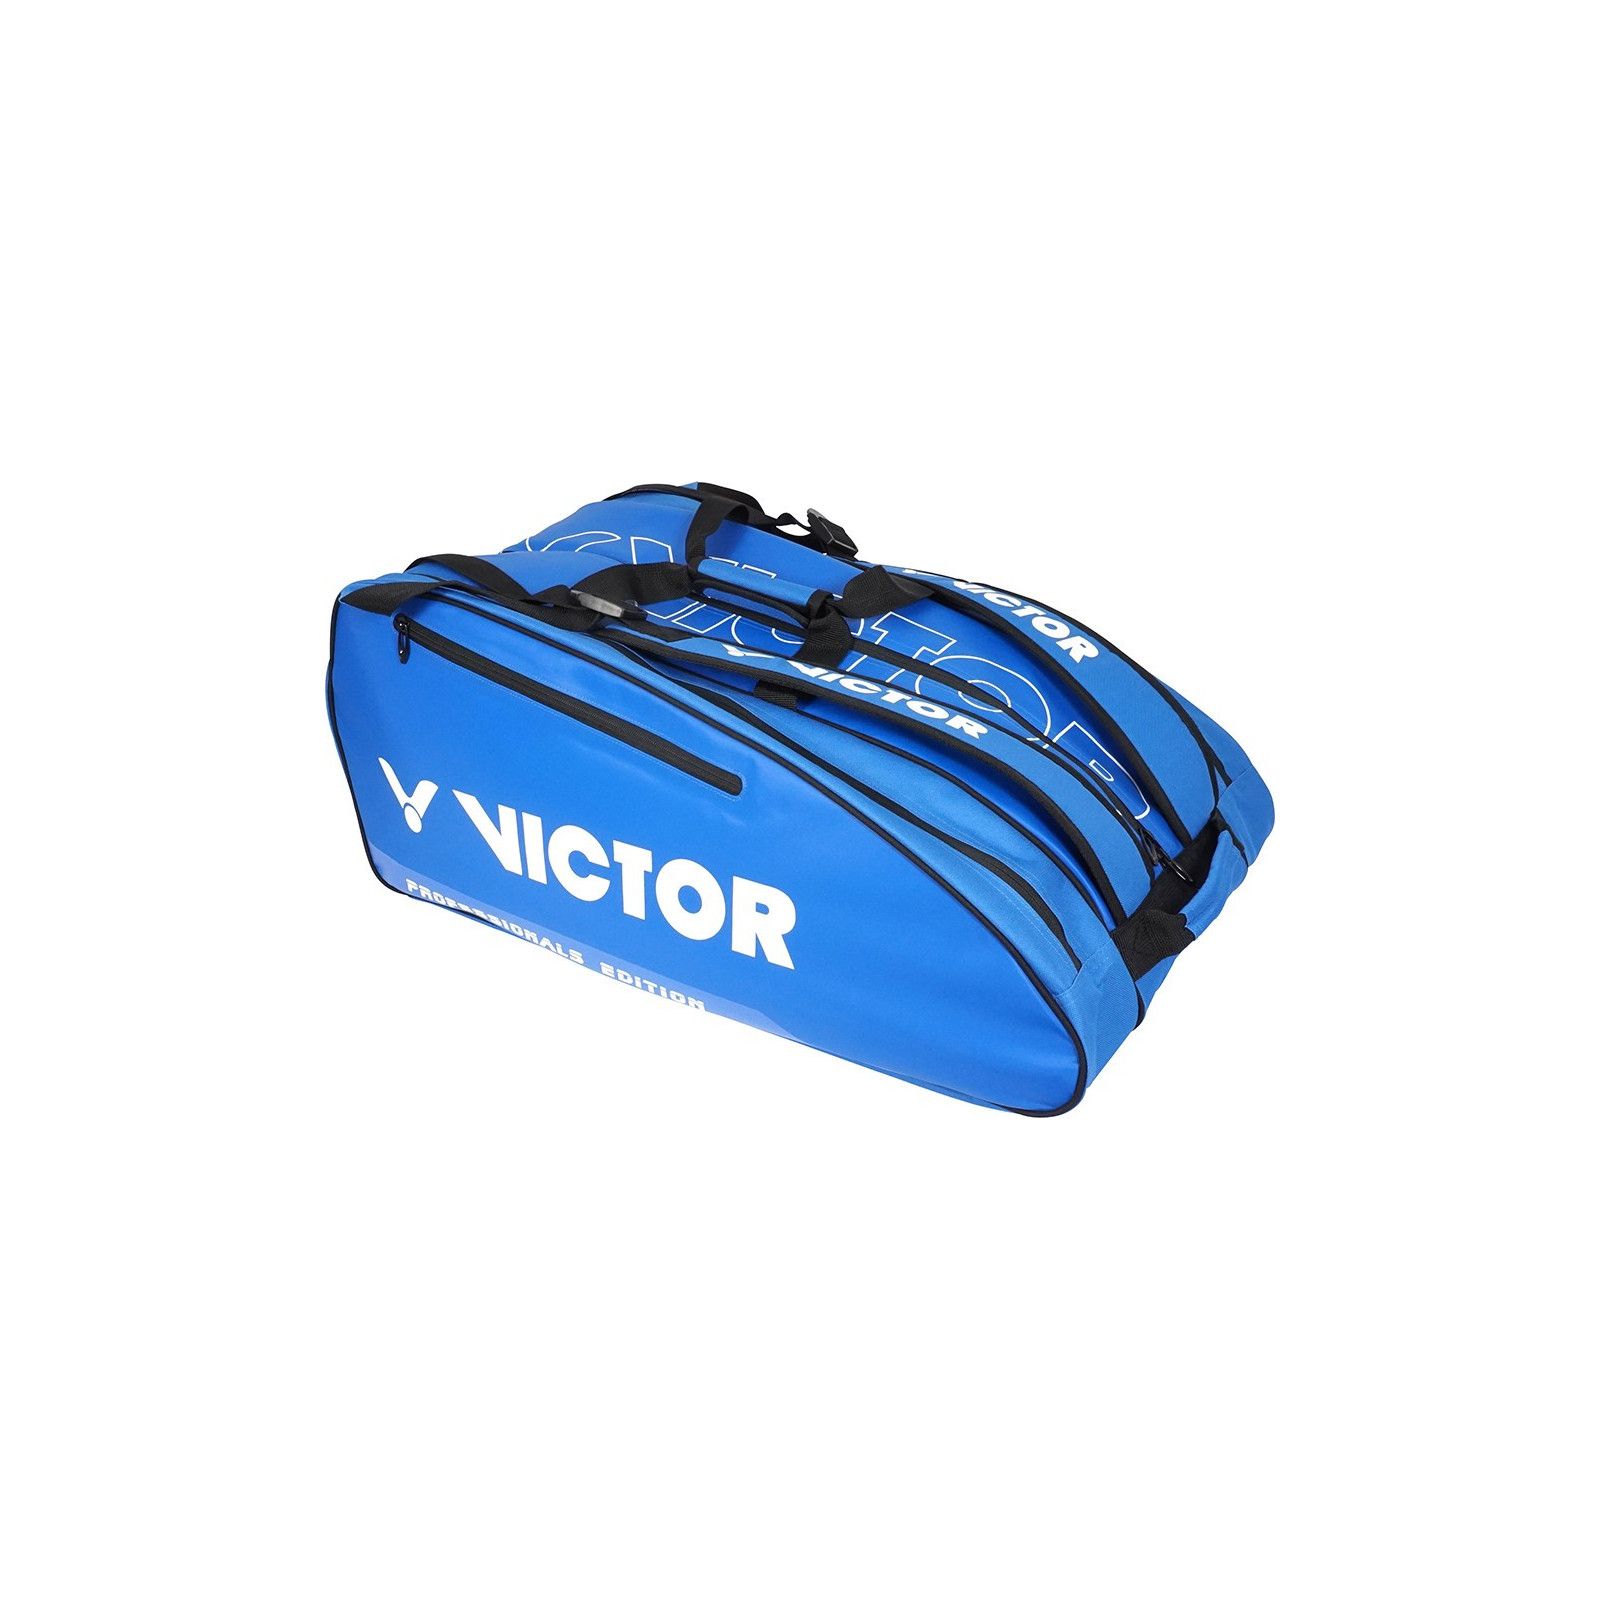 Victor Multithermobag 9031 Blue